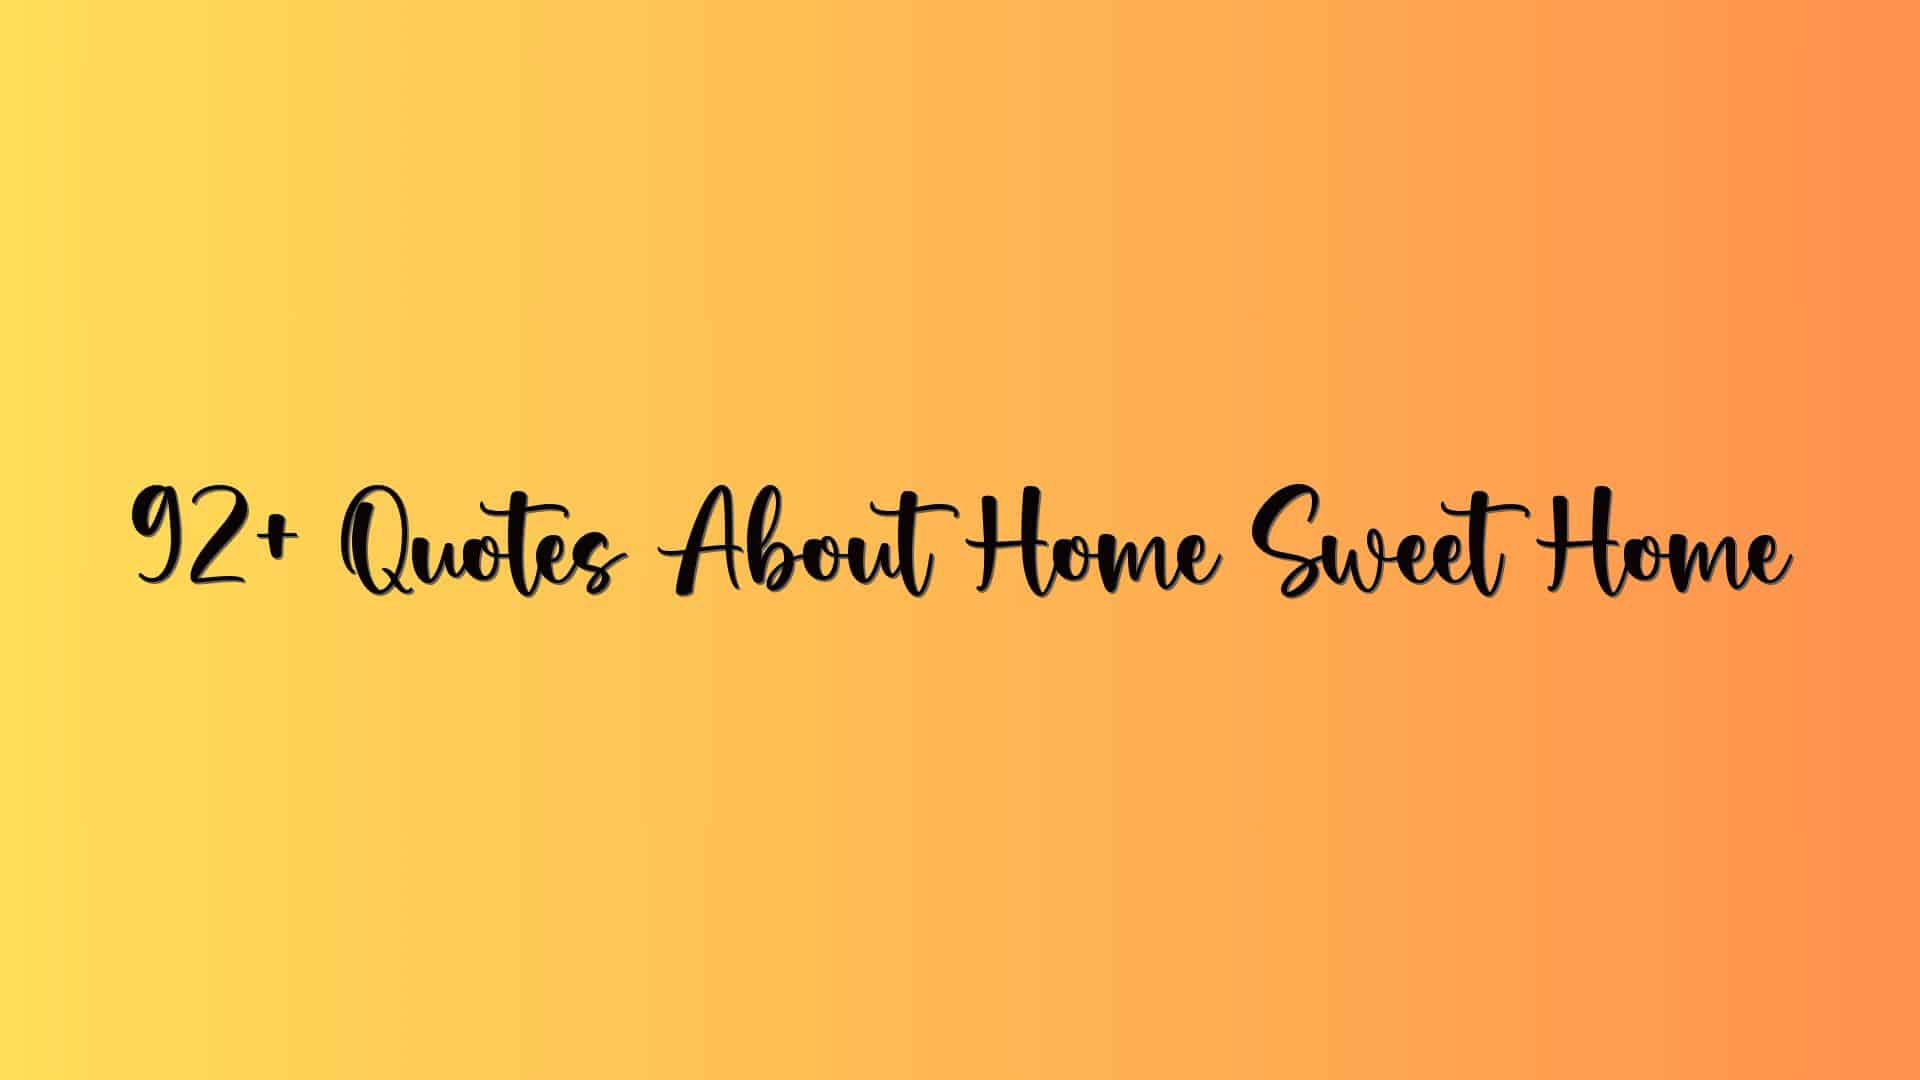 92+ Quotes About Home Sweet Home